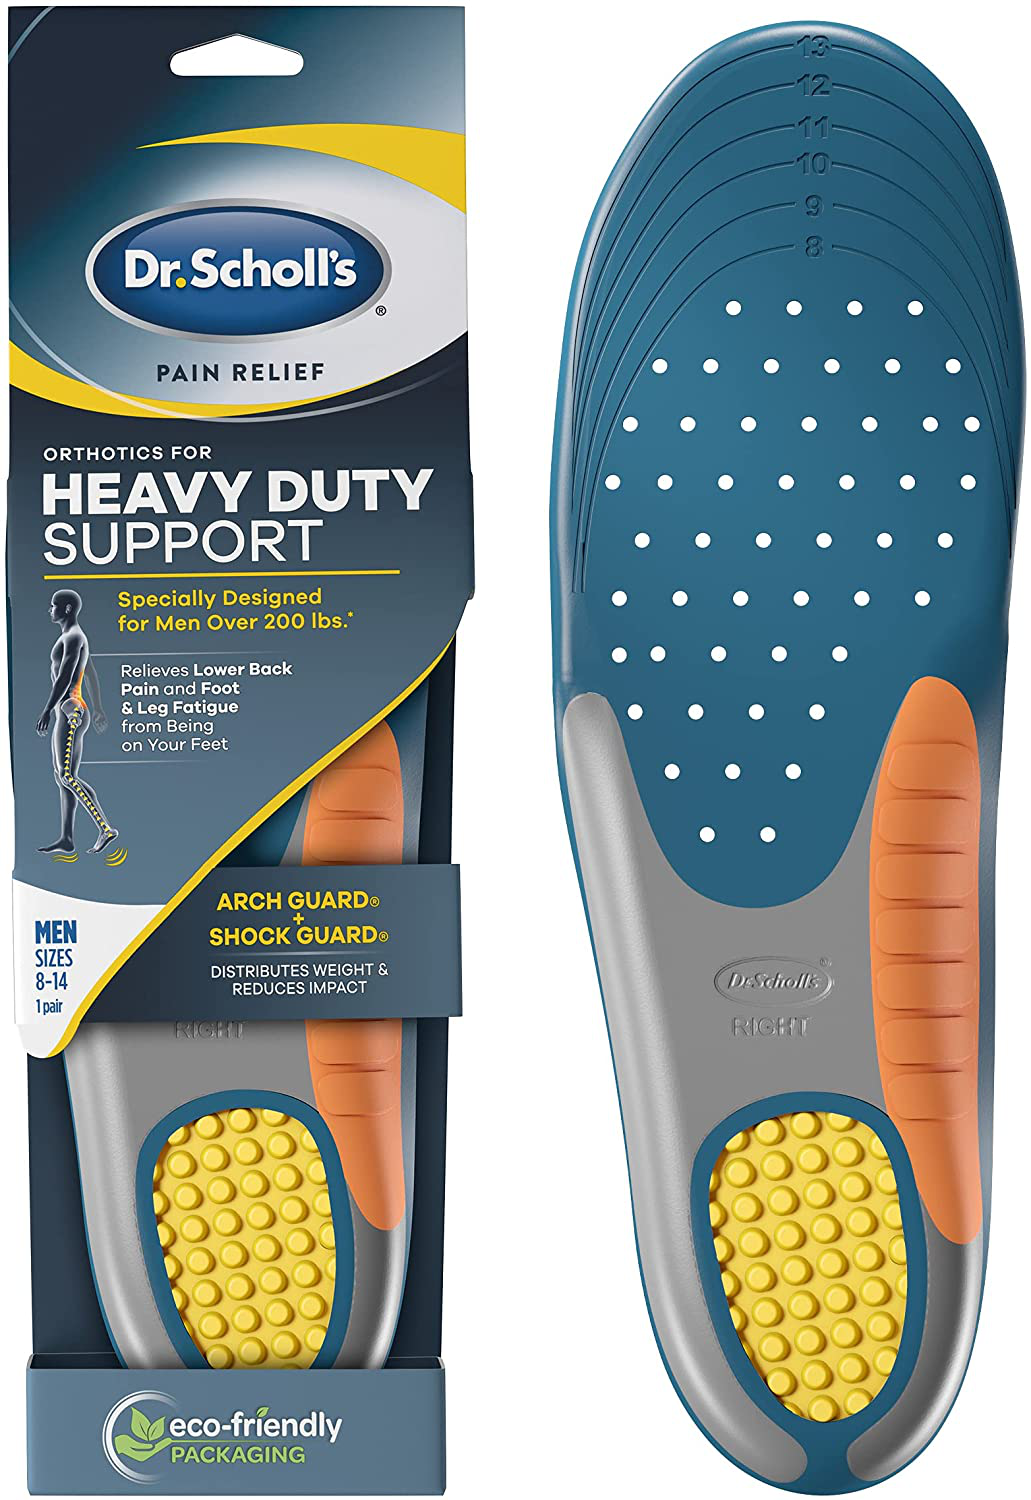 Dr. Scholl's Insoles for Women or Men Extra Support Pain Relief Orthotics Shoe Inserts